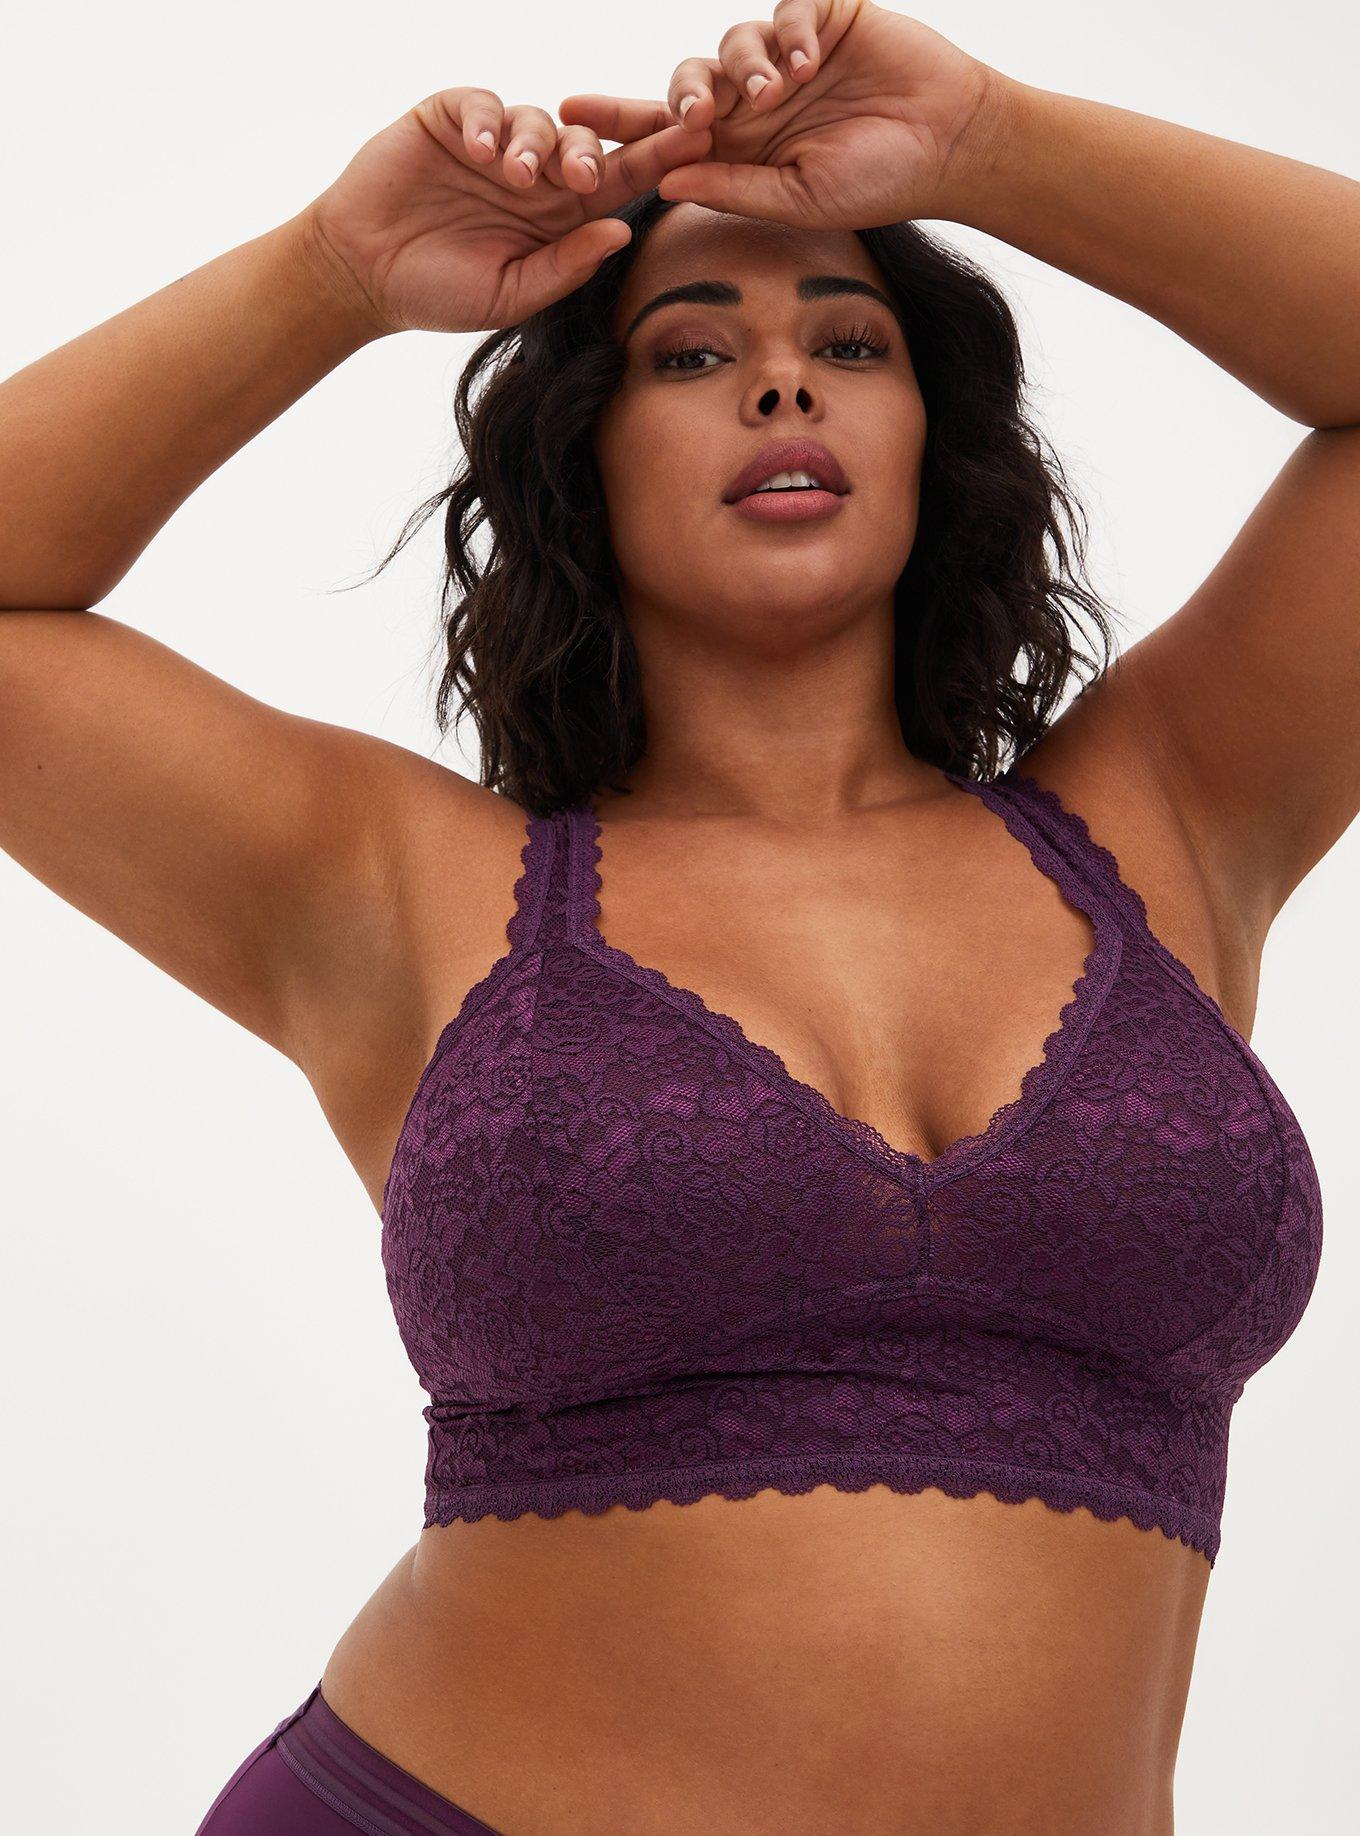 Buy Marilyn Monroe s Women's Sexy Bralette with Lacey Racer Back